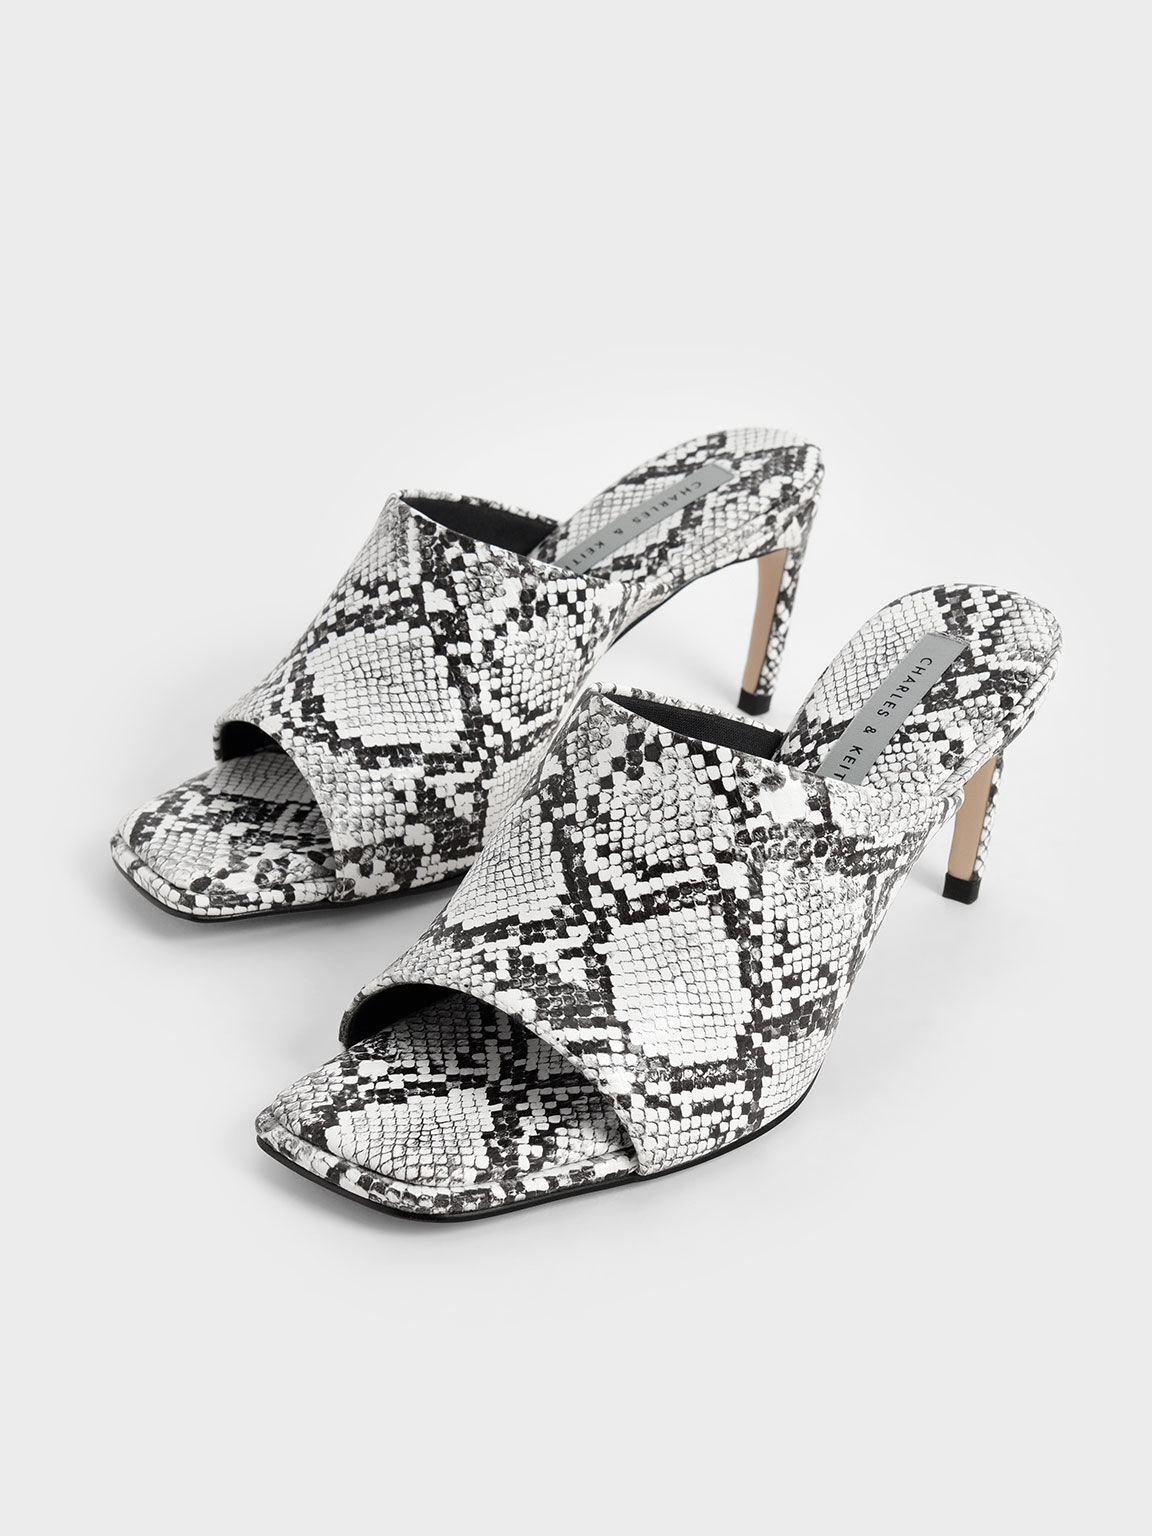 White Snake-Print Stiletto Heel Mules - CHARLES & KEITH IN